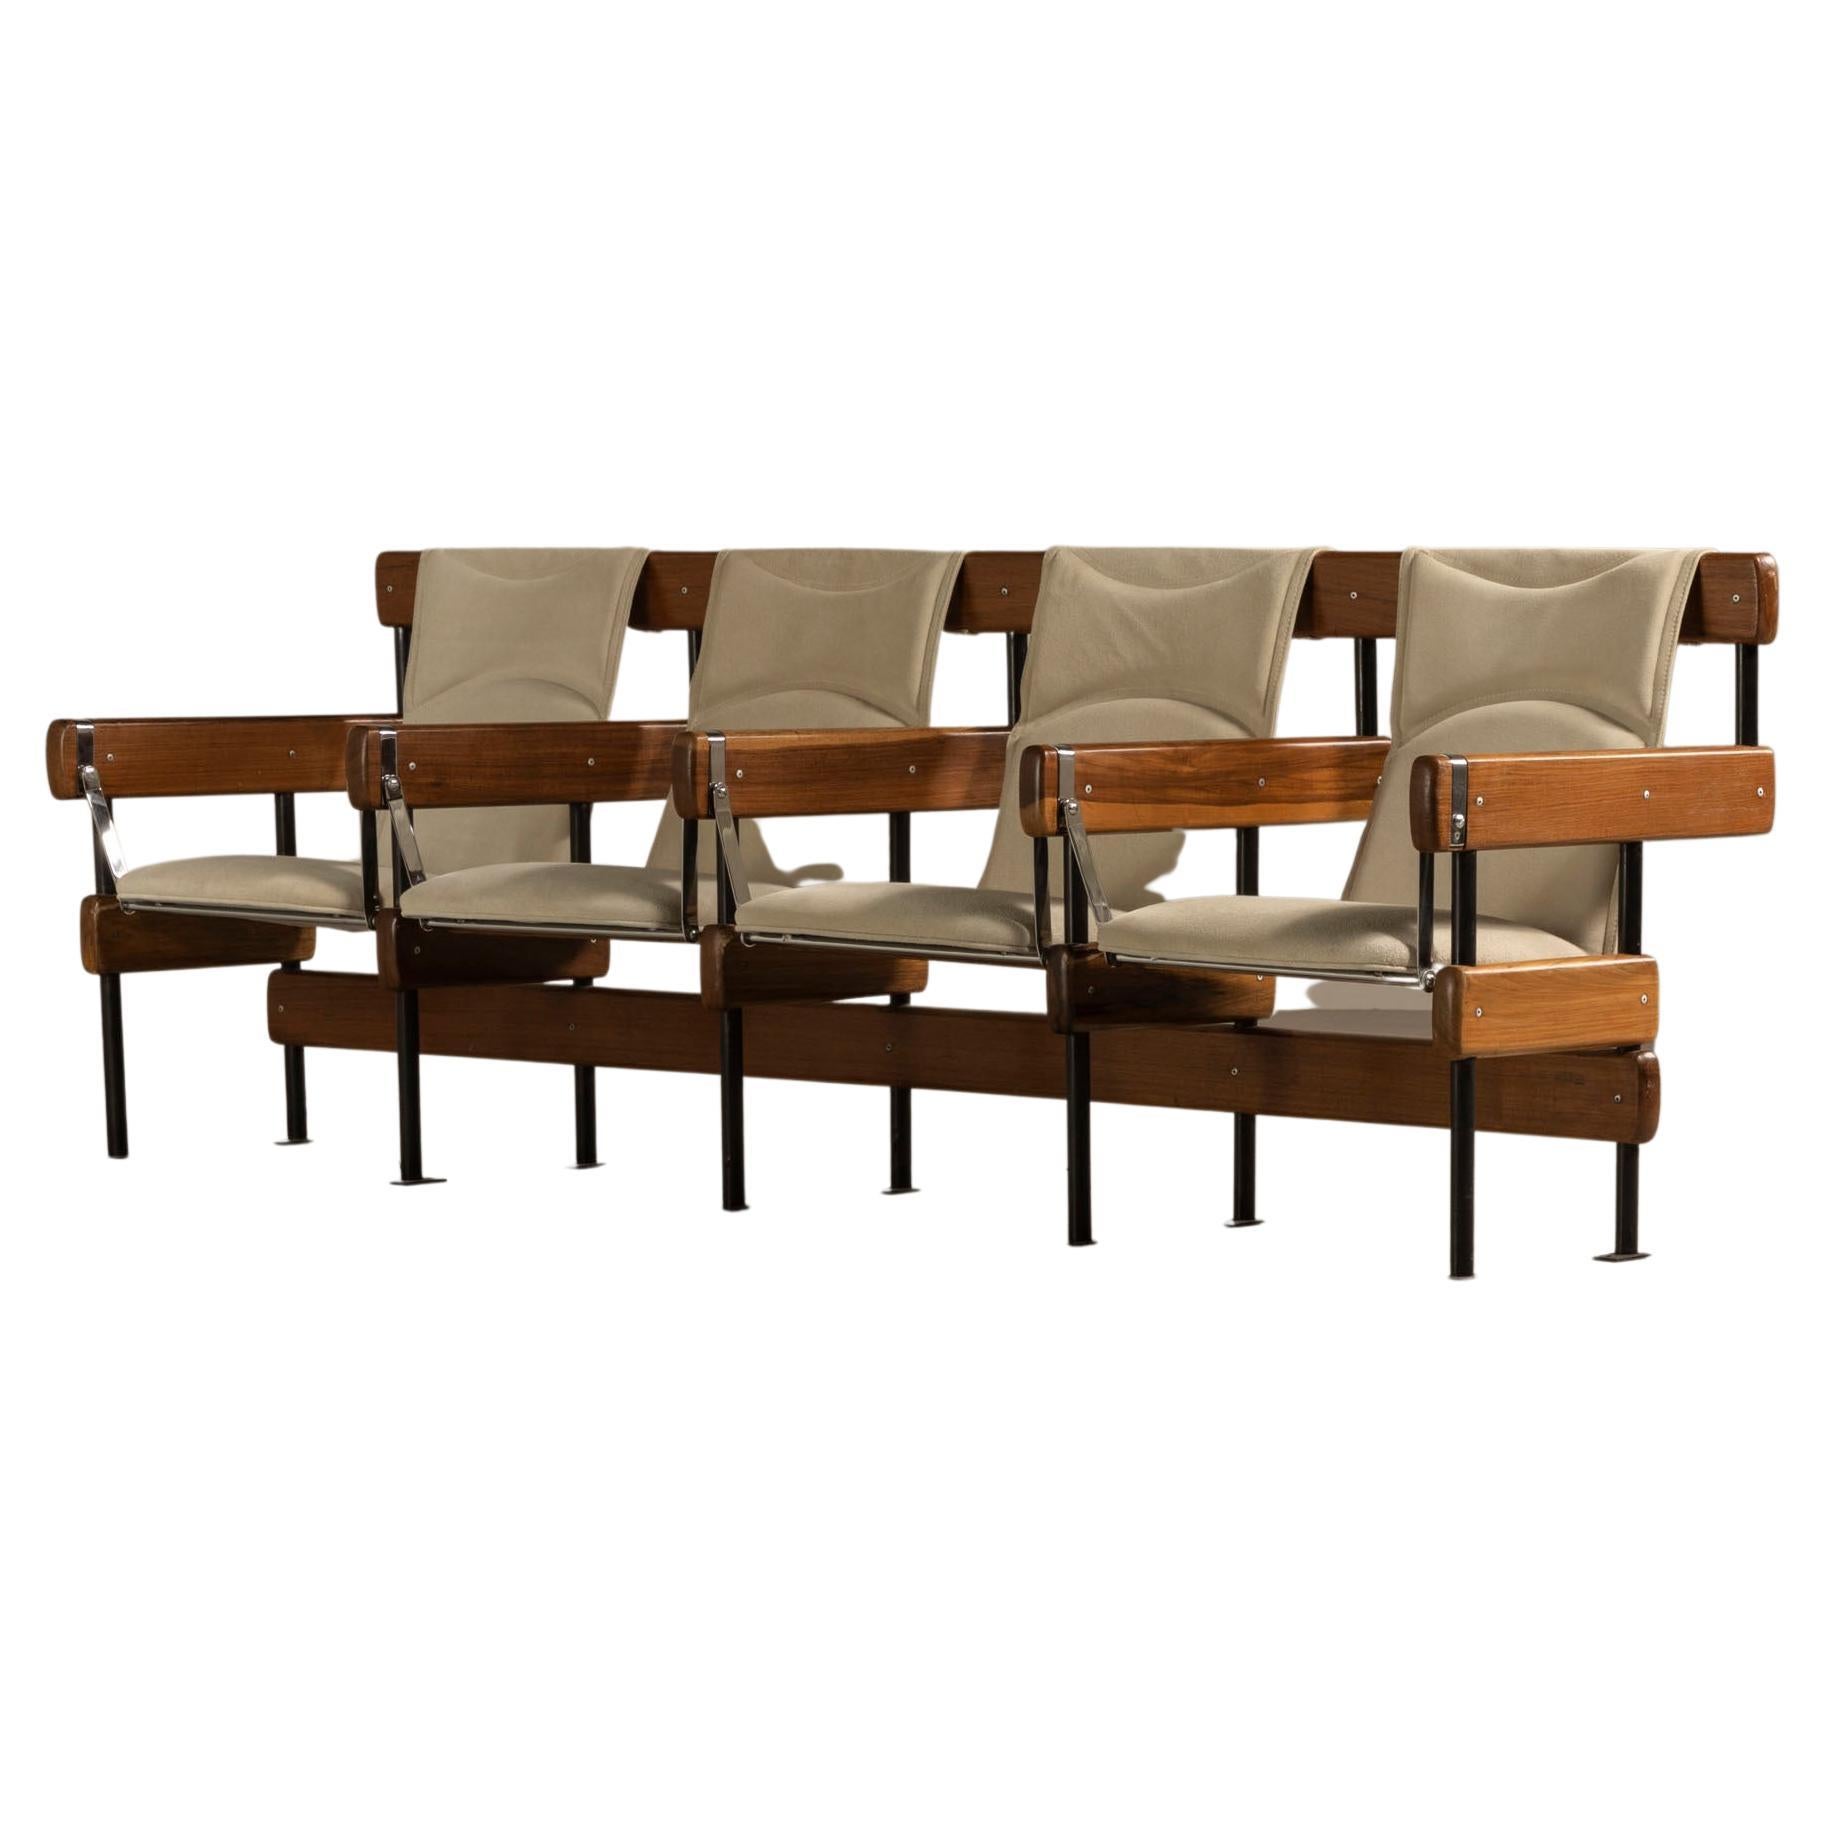 Four Seats "Longarina", by Sergio Rodrigues, 1965, Brazilian Mid-Century Modern For Sale